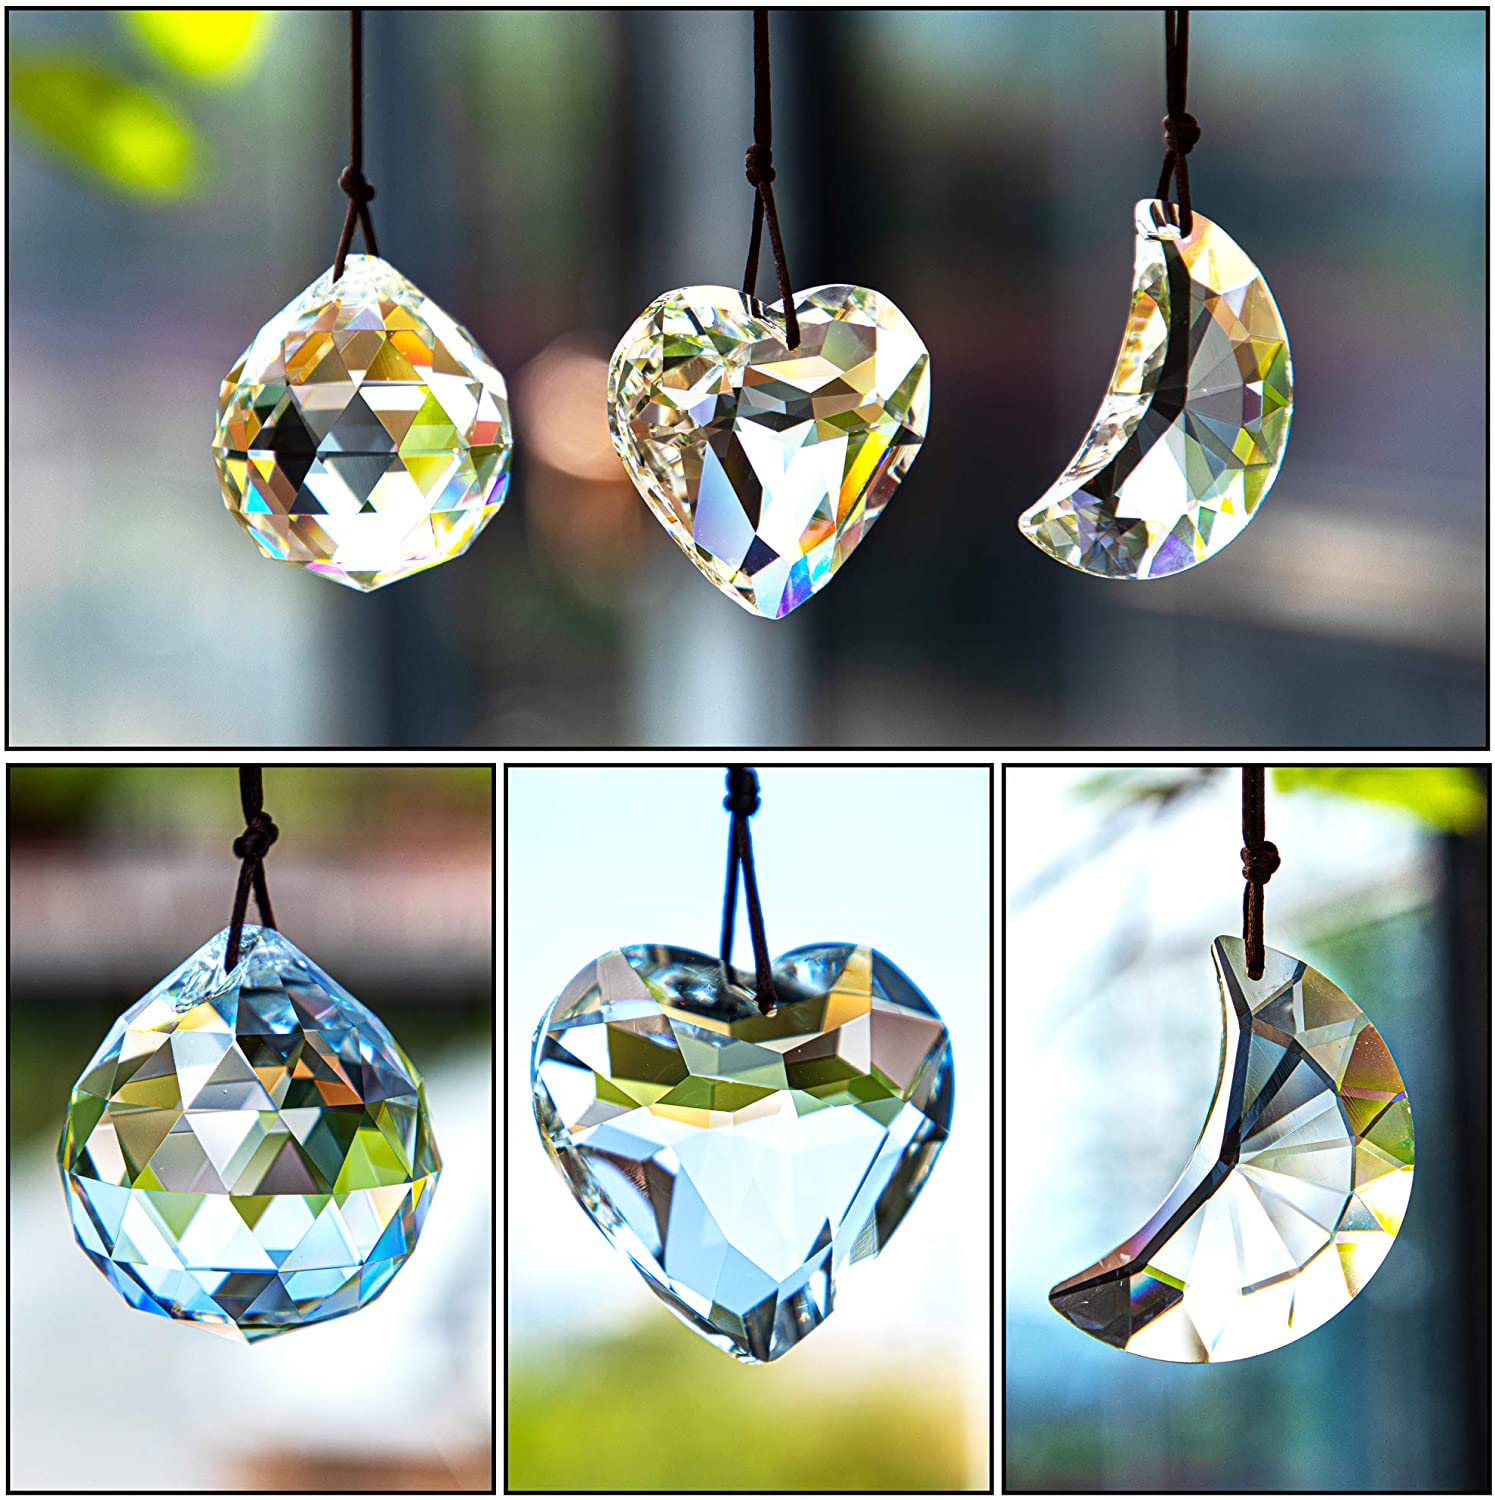 3 pcs Hanging Crystal Suncatcher Prism Ball Heart Moon Window Decor Car Charms,Christmas Gift for Her,Kids,Hanging Holiday Decorations